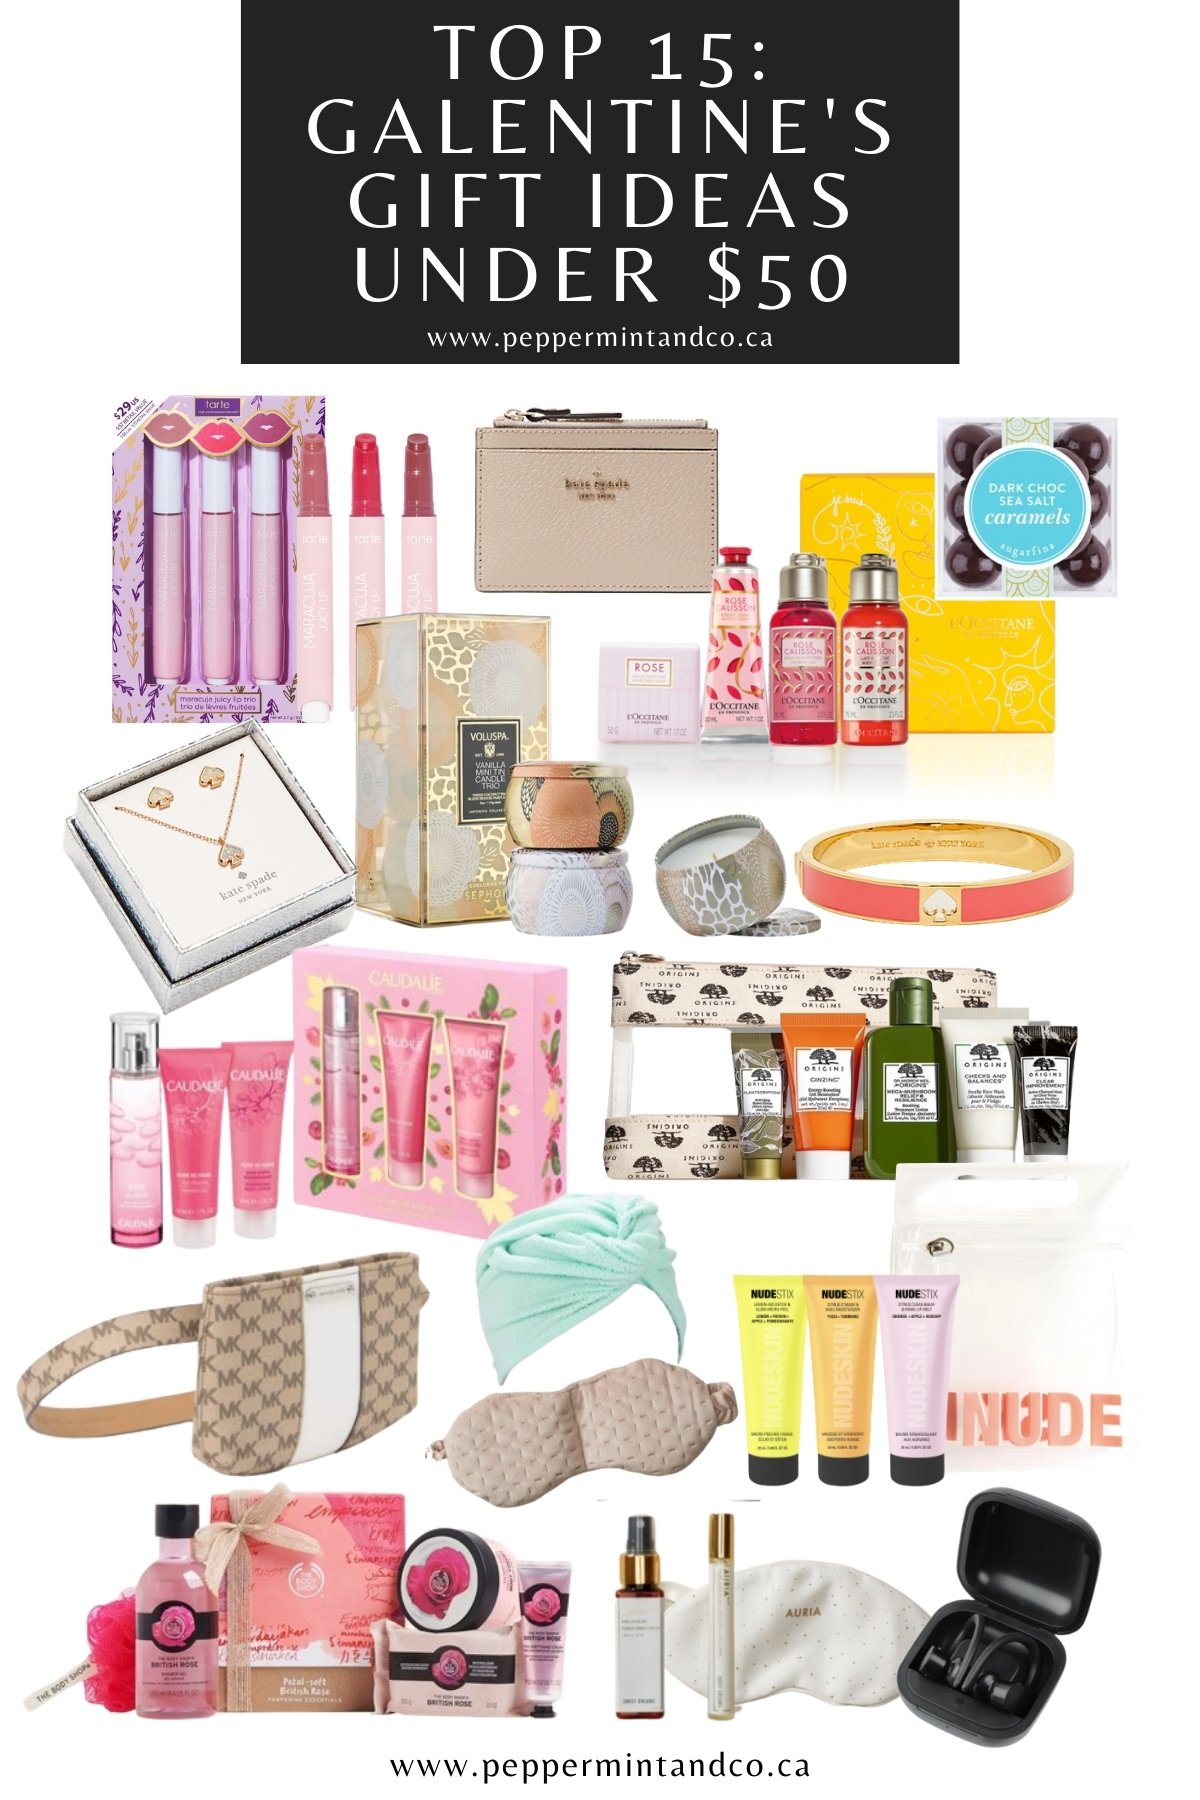 Colorful Gifts Under $50 - Gift Guide - A Kailo Chic Life